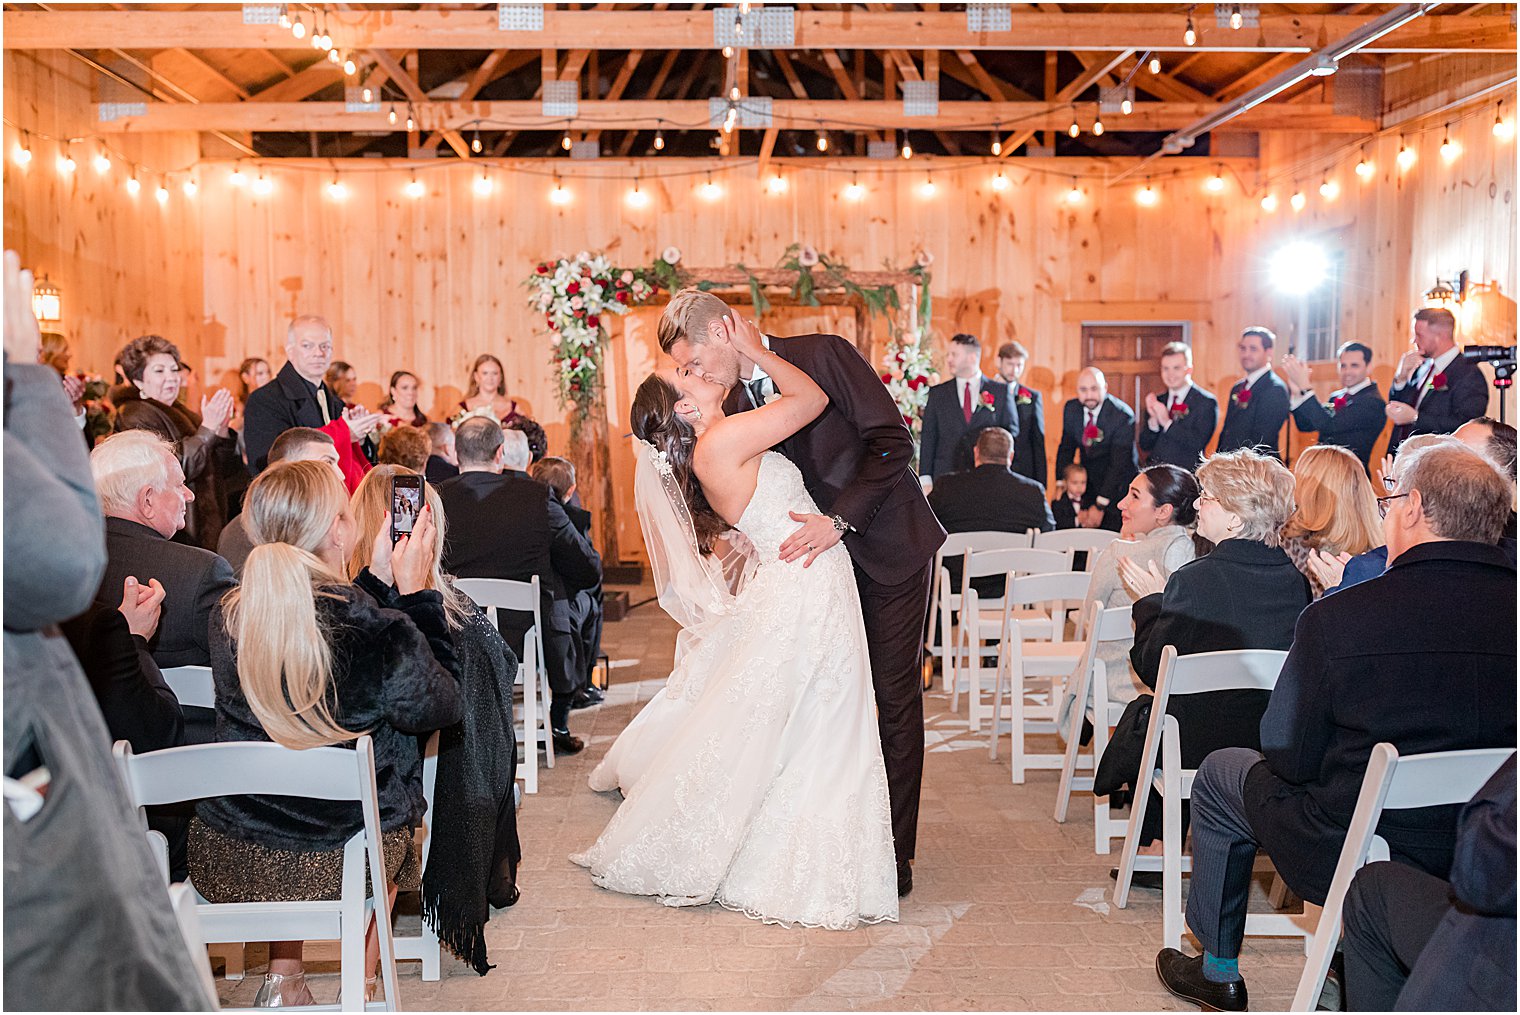 newlyweds walk up aisle and kiss after wedding ceremony in farmhouse